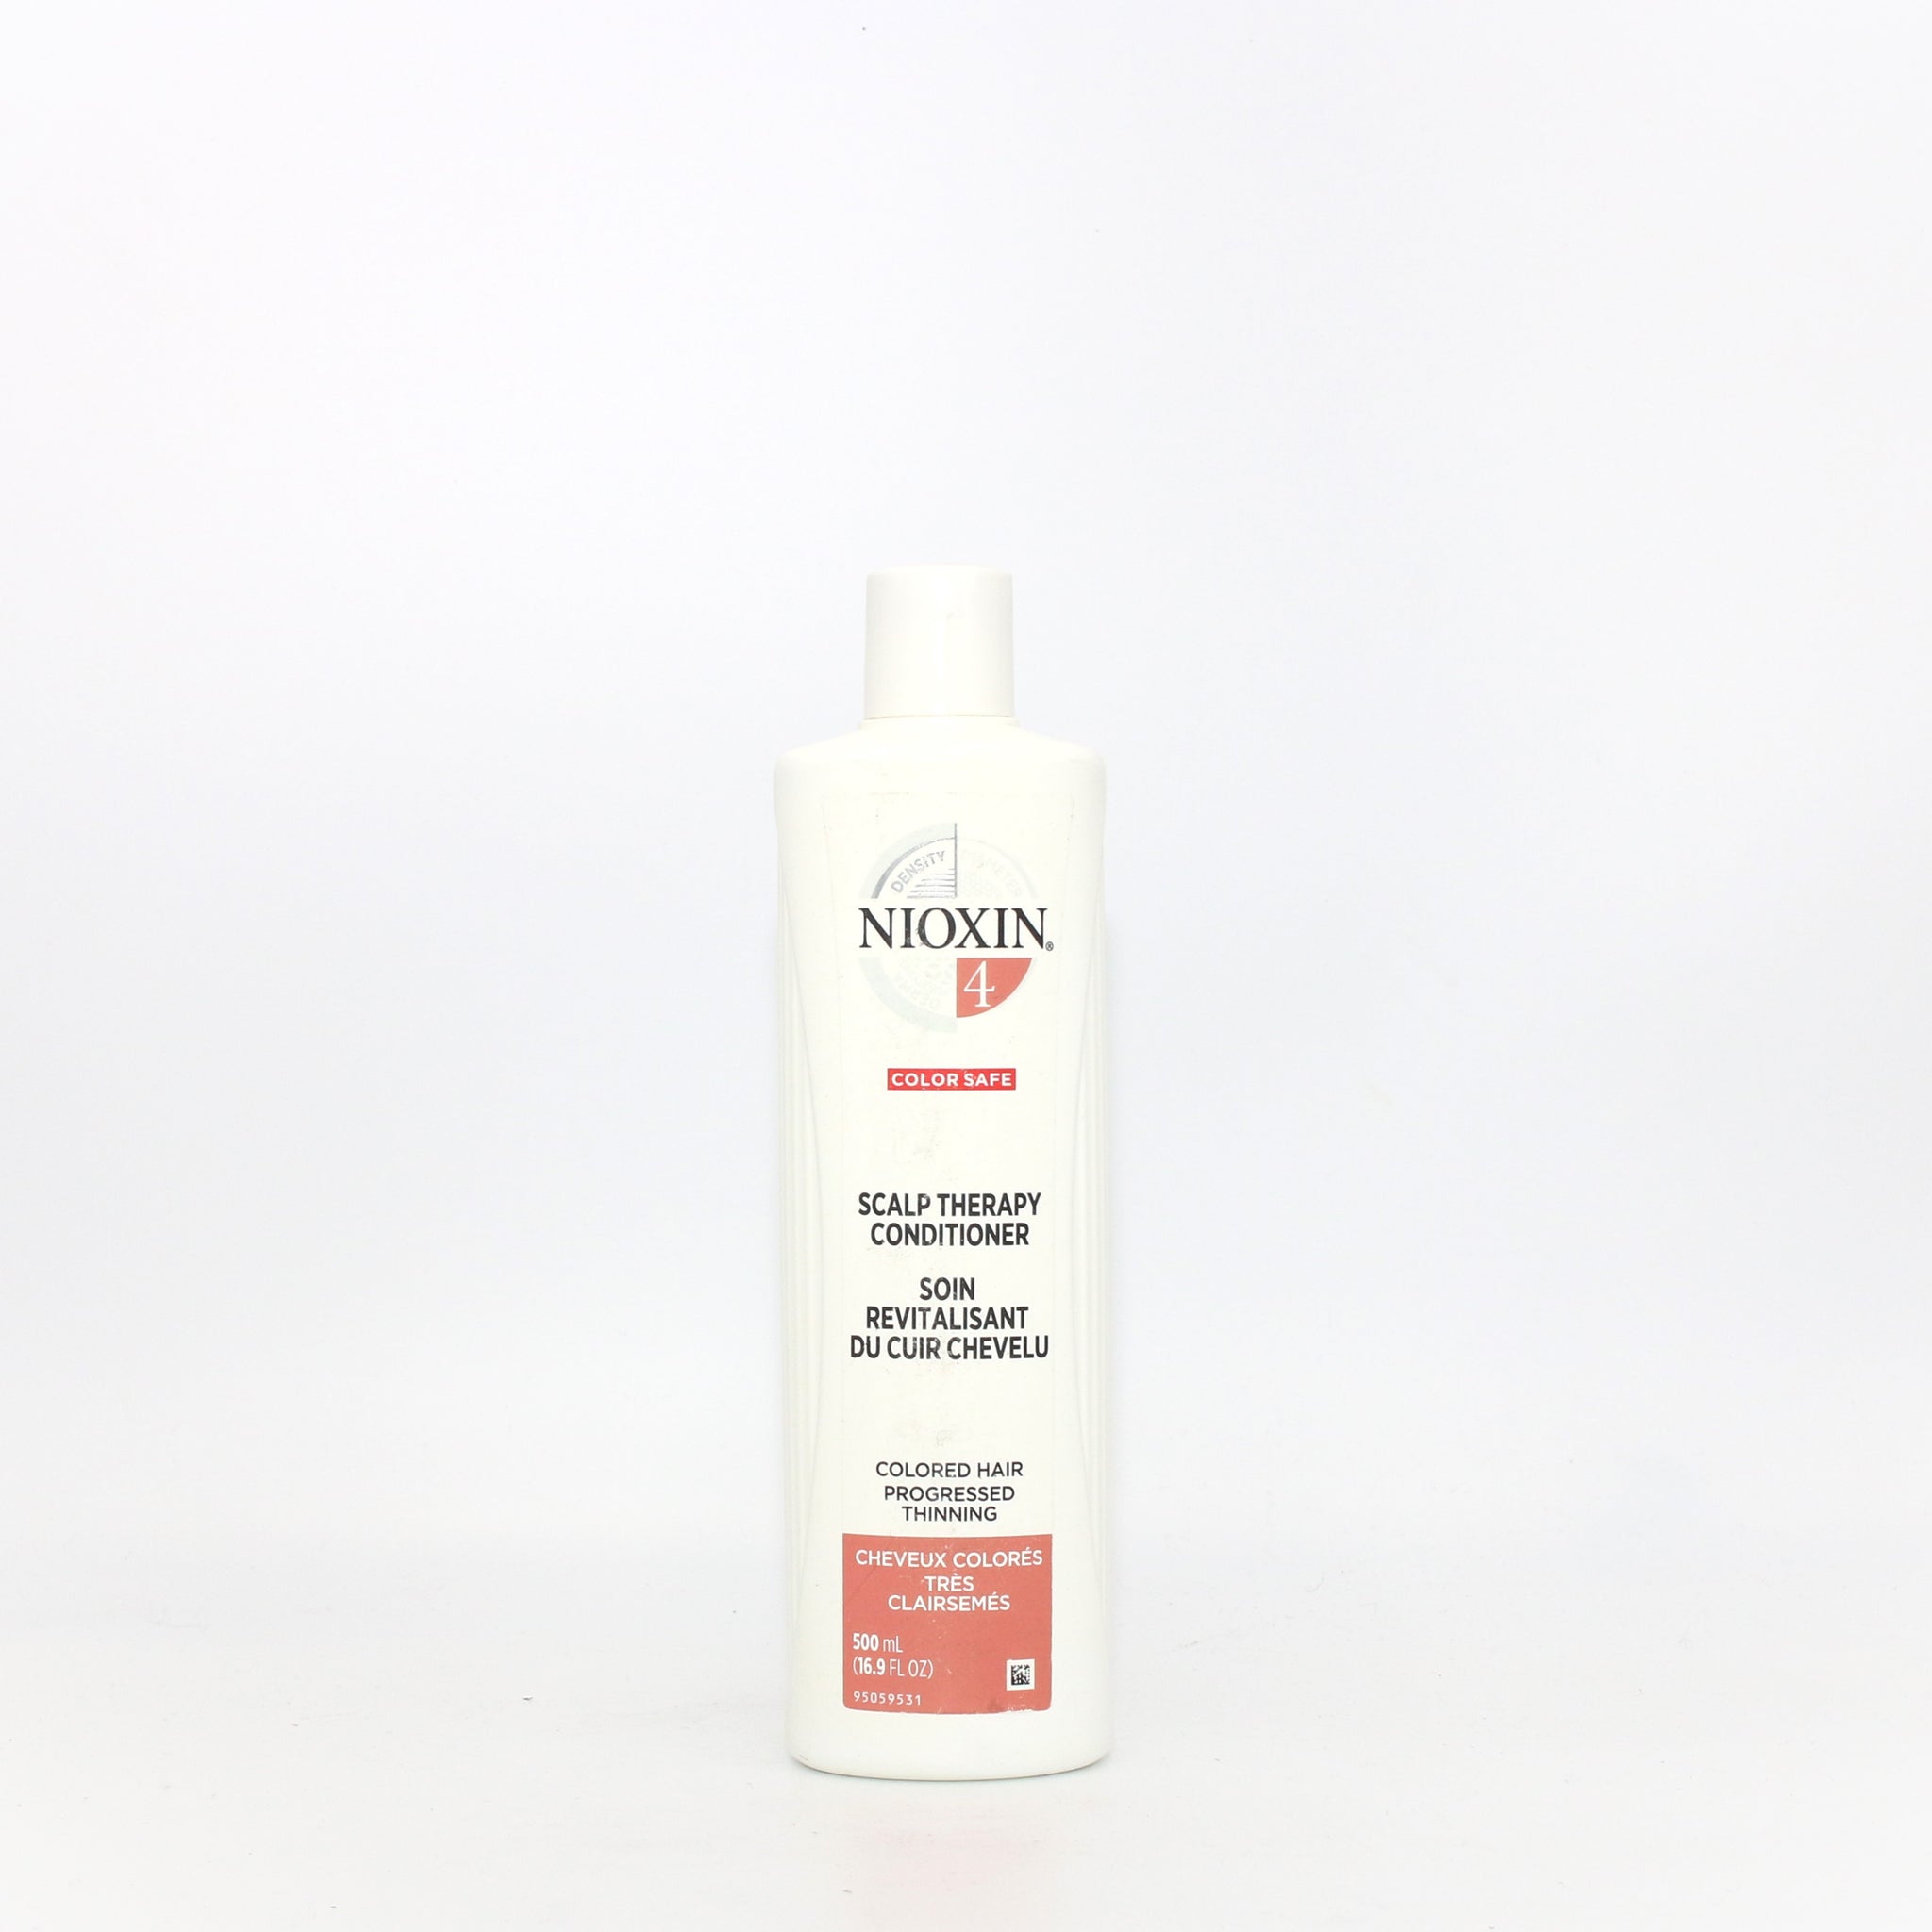 NIOXIN 4 Scalp Therapy Conditioner Derma Purifying 4 16.9 oz